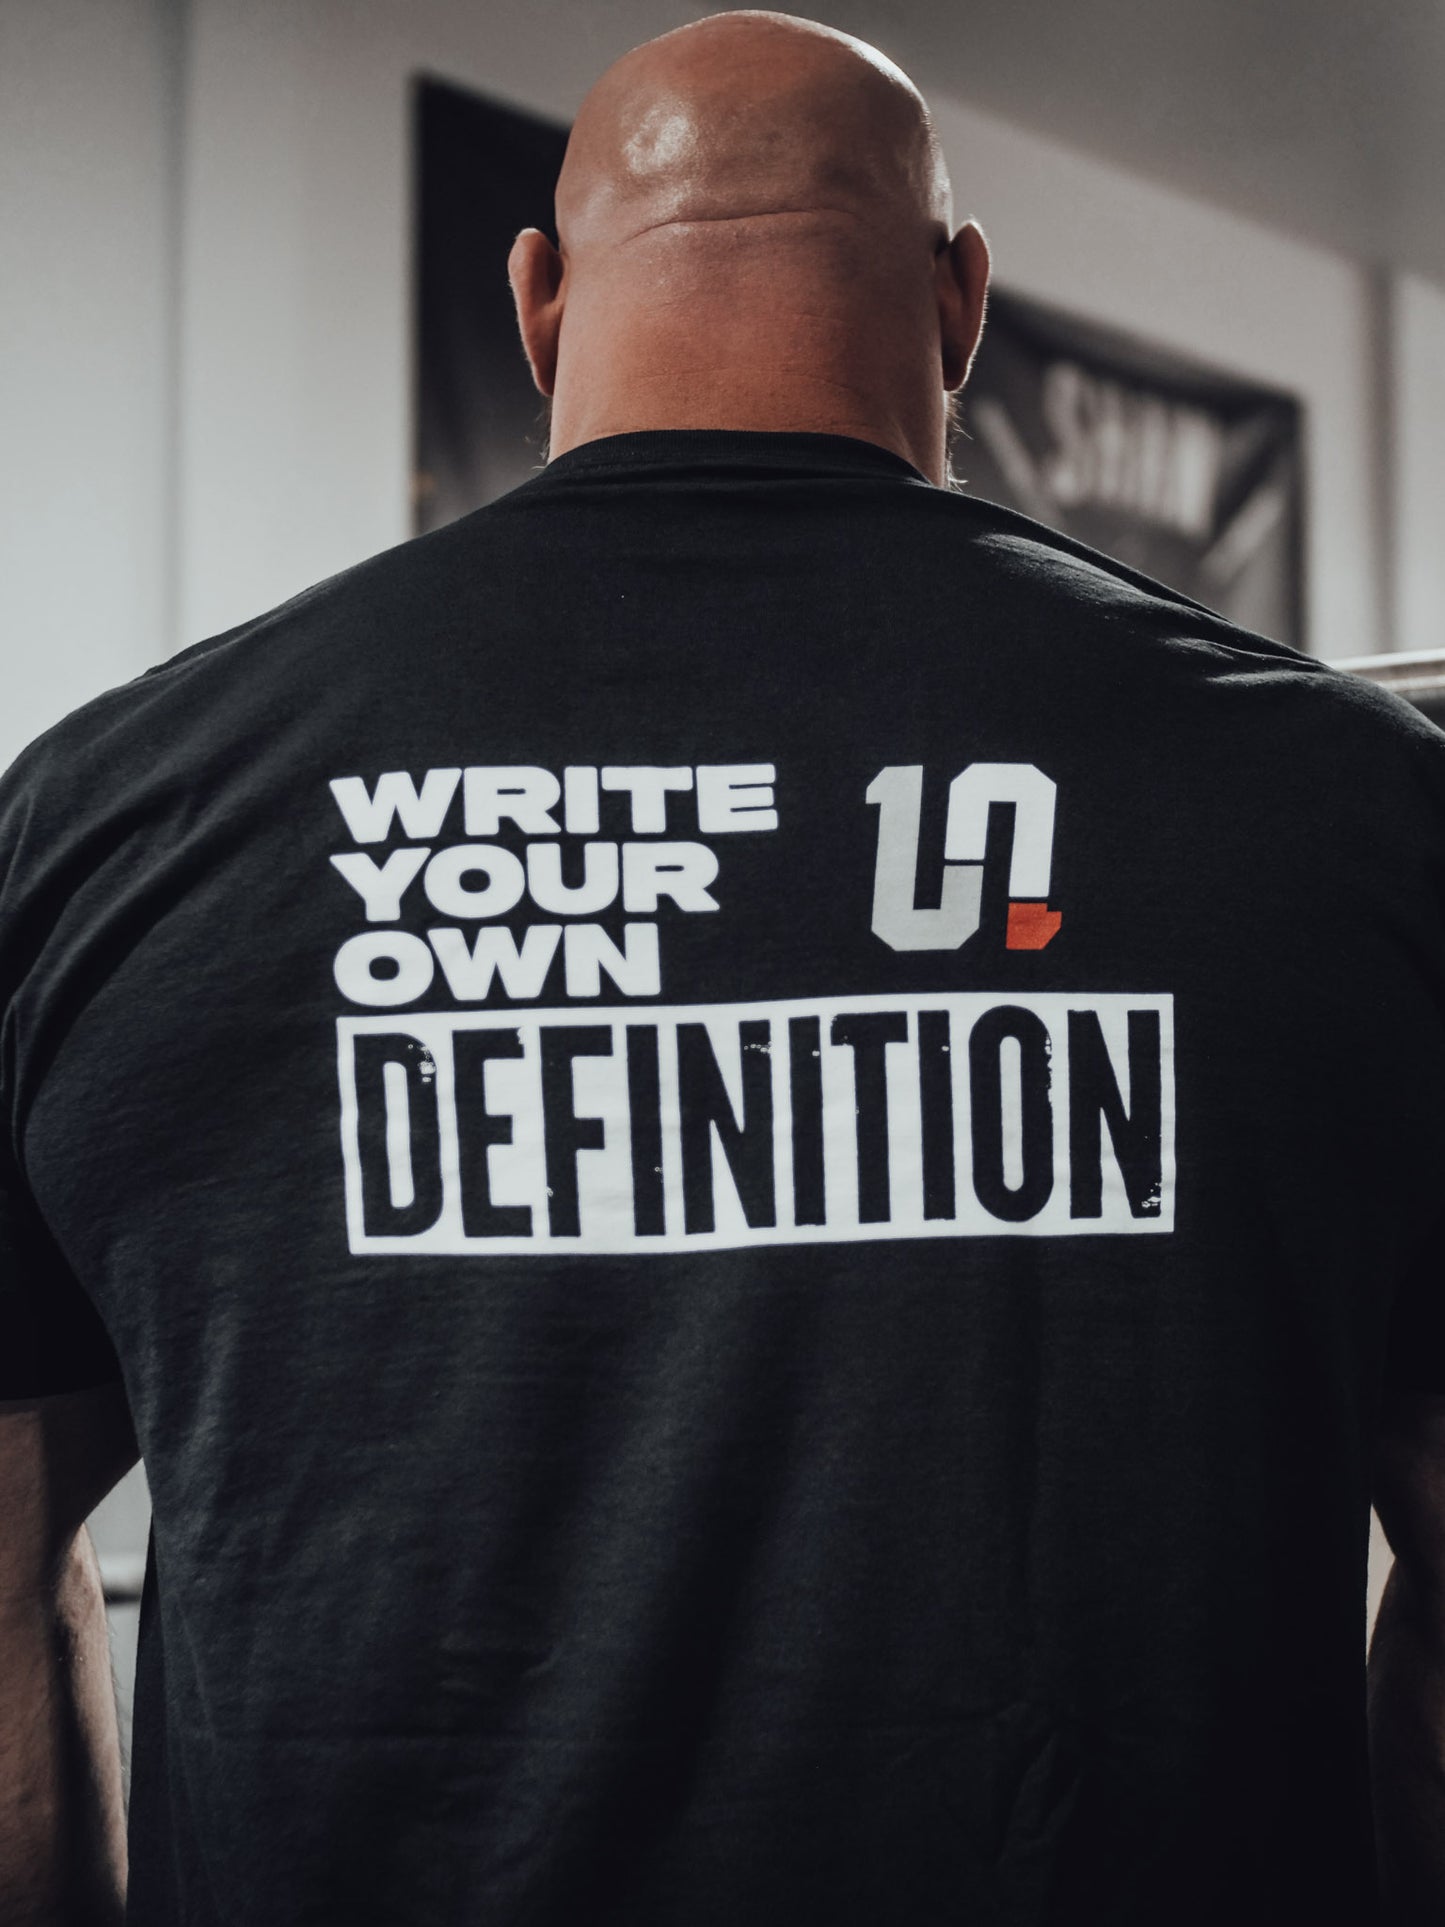 WRITE YOUR OWN DEFINITION